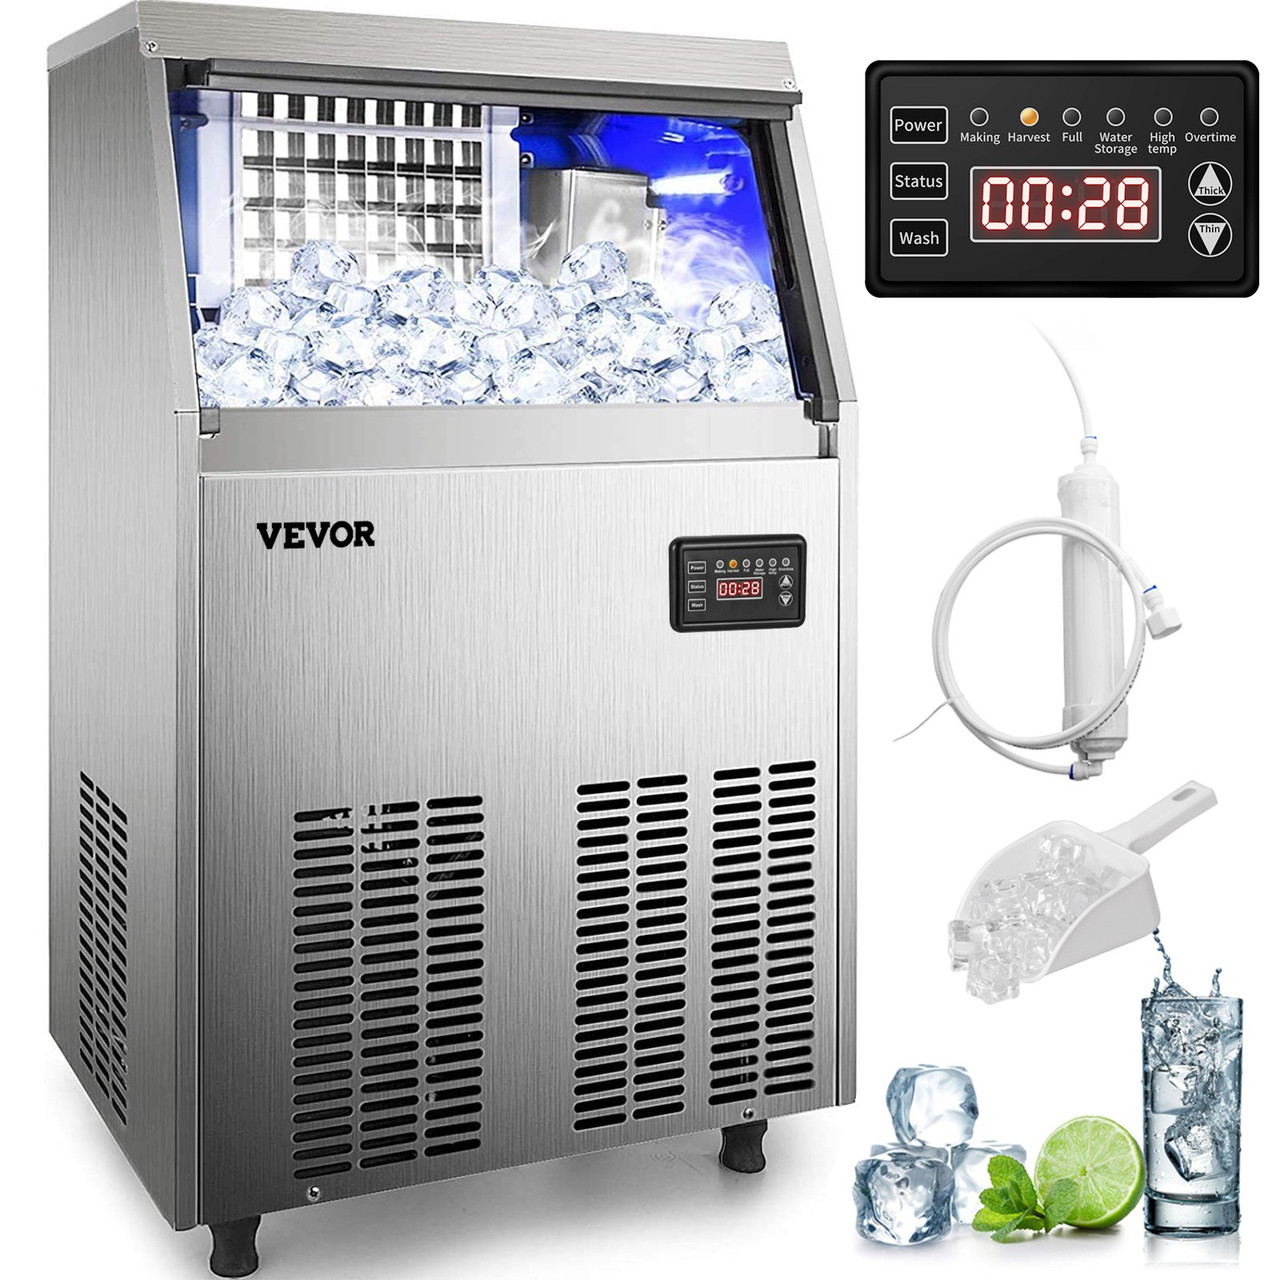 110V Commercial Ice Maker Machine 120-130LBS/24H with 33LBS Bin, Stainless Steel Automatic Operation Under Counter Ice Machine for Home Bar, Include Water Filter, Scoop, Connection Hose